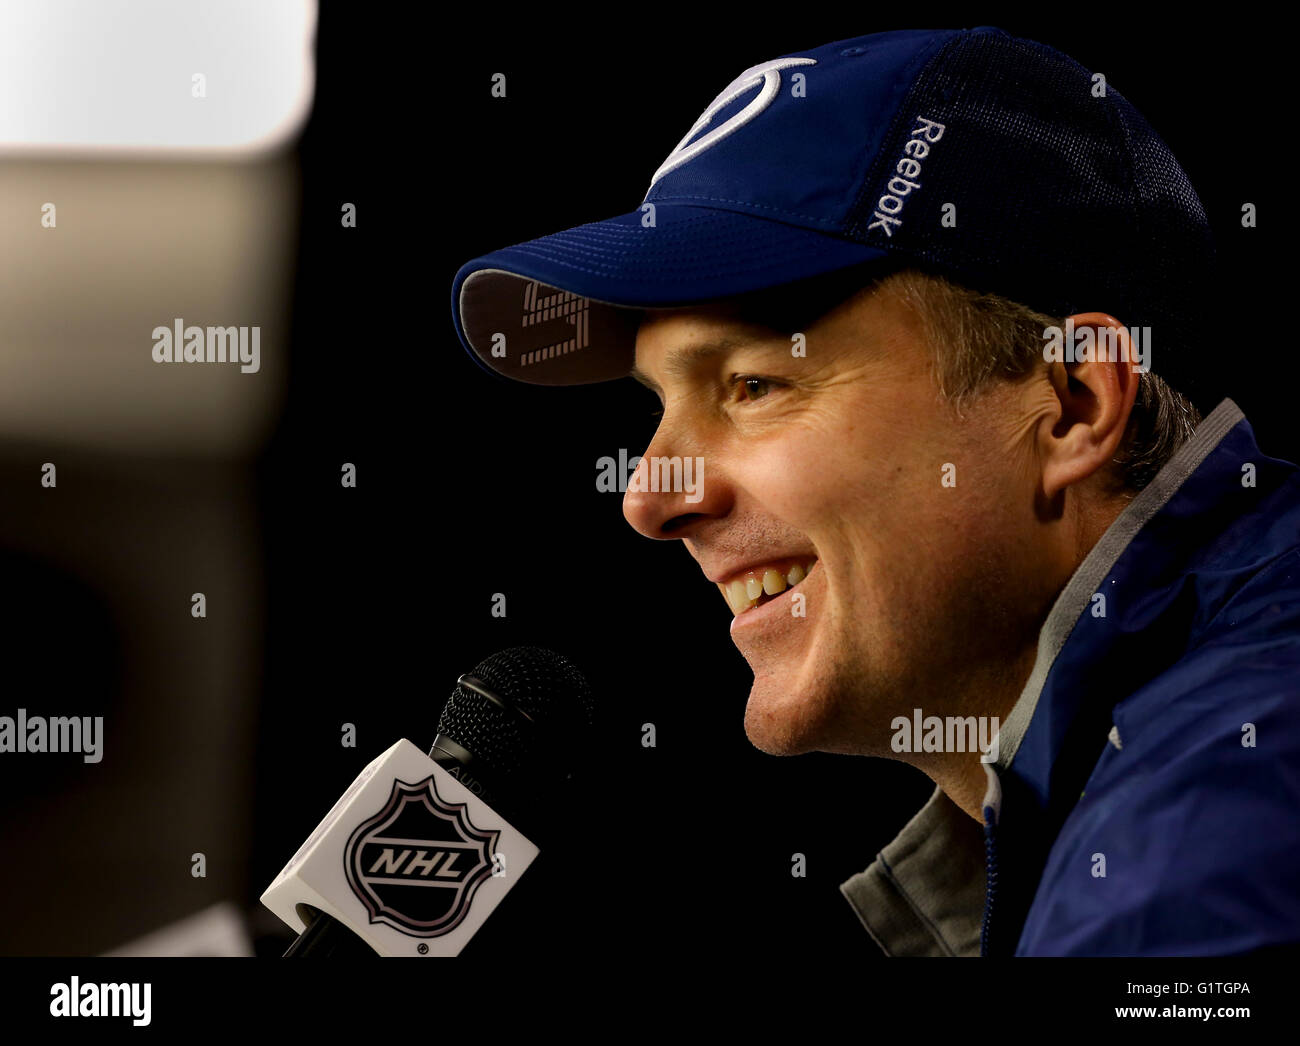 Pittsburgh, Florida, USA. 15th May, 2016. DIRK SHADD | Times .Tampa Bay Lightning head coach Jon Cooper addresses the media after the team practices on the ice at the Console Energy Center in Pittsburgh Sunday afternoon (05/15/16) © Dirk Shadd/Tampa Bay Times/ZUMA Wire/Alamy Live News Stock Photo